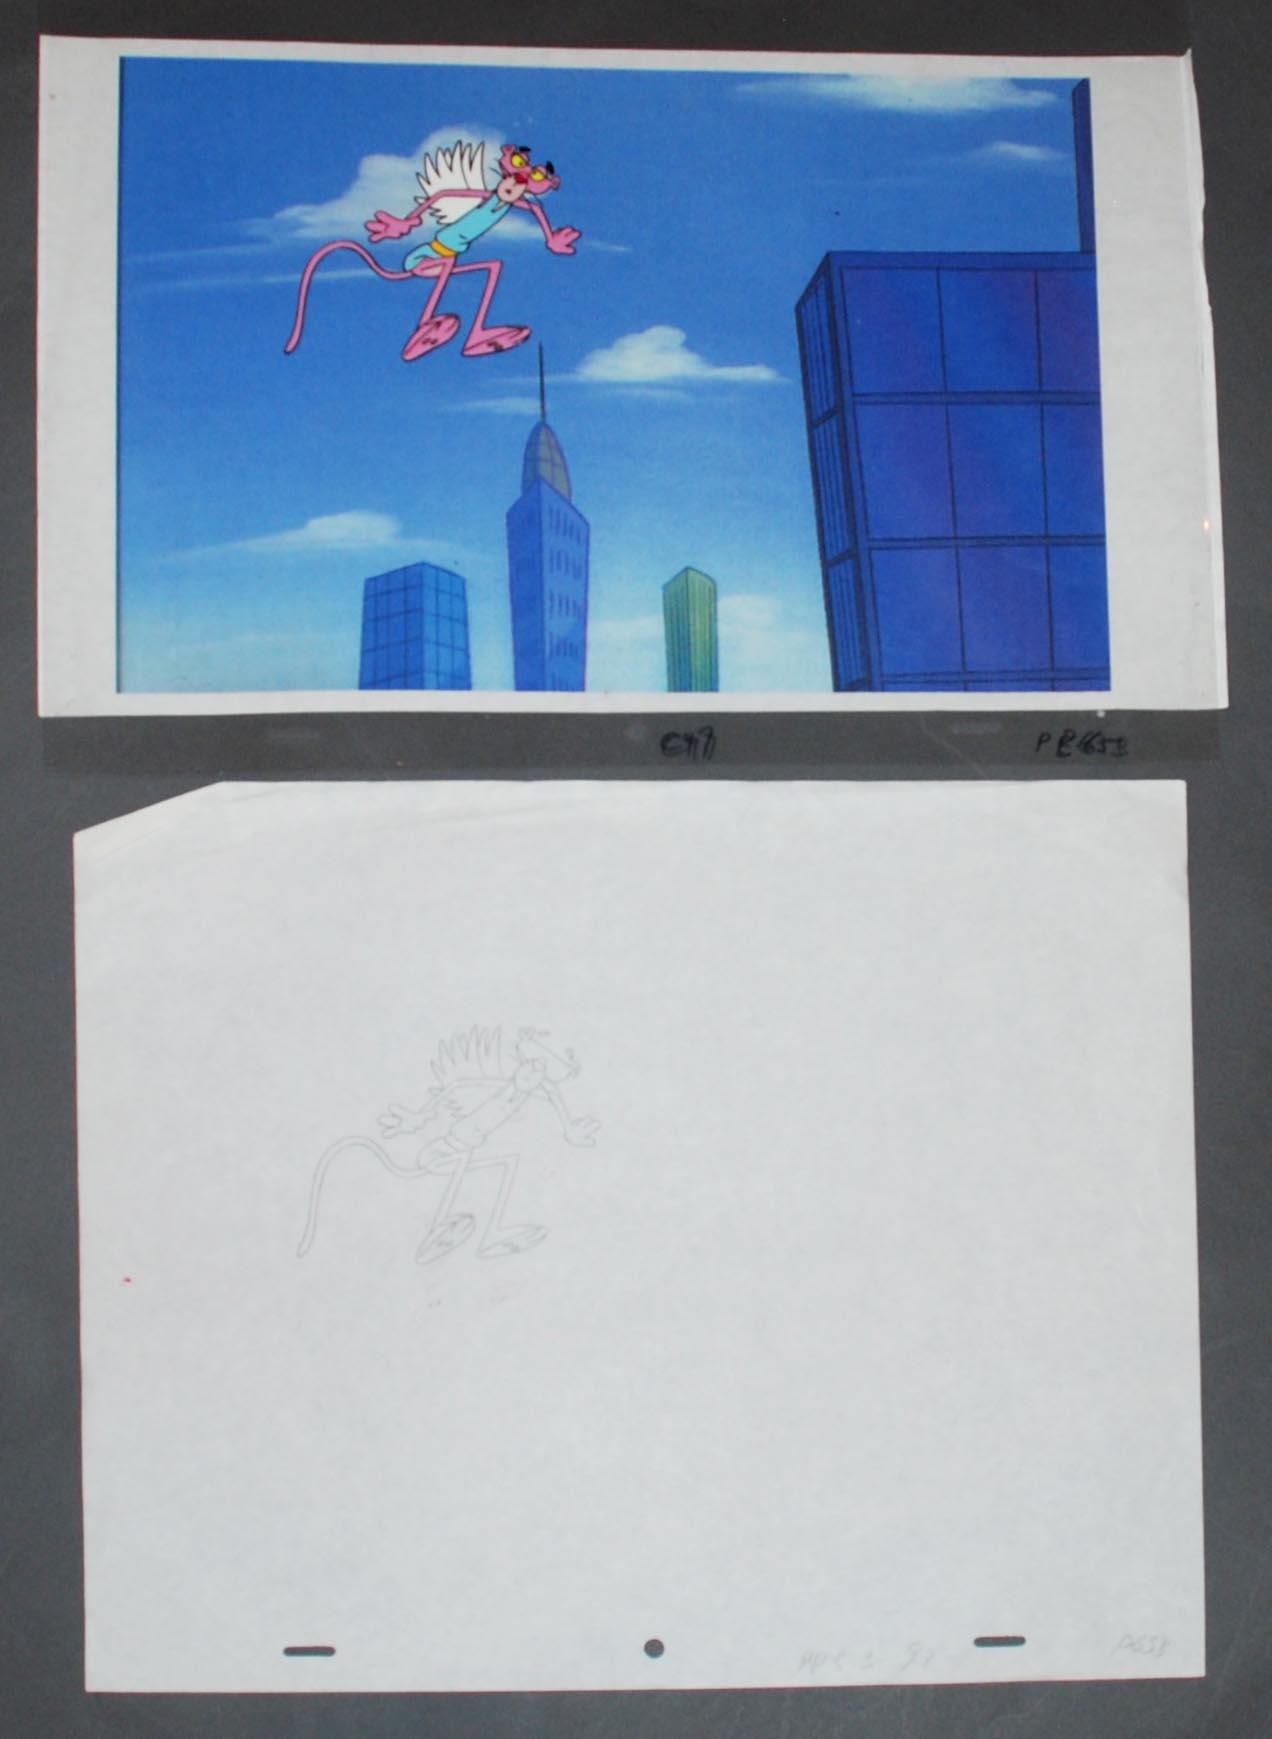 Original Pink Panther 2 Production Cel Set Up on Color Copy Background with matching Production Drawing featuring The Pink Panther